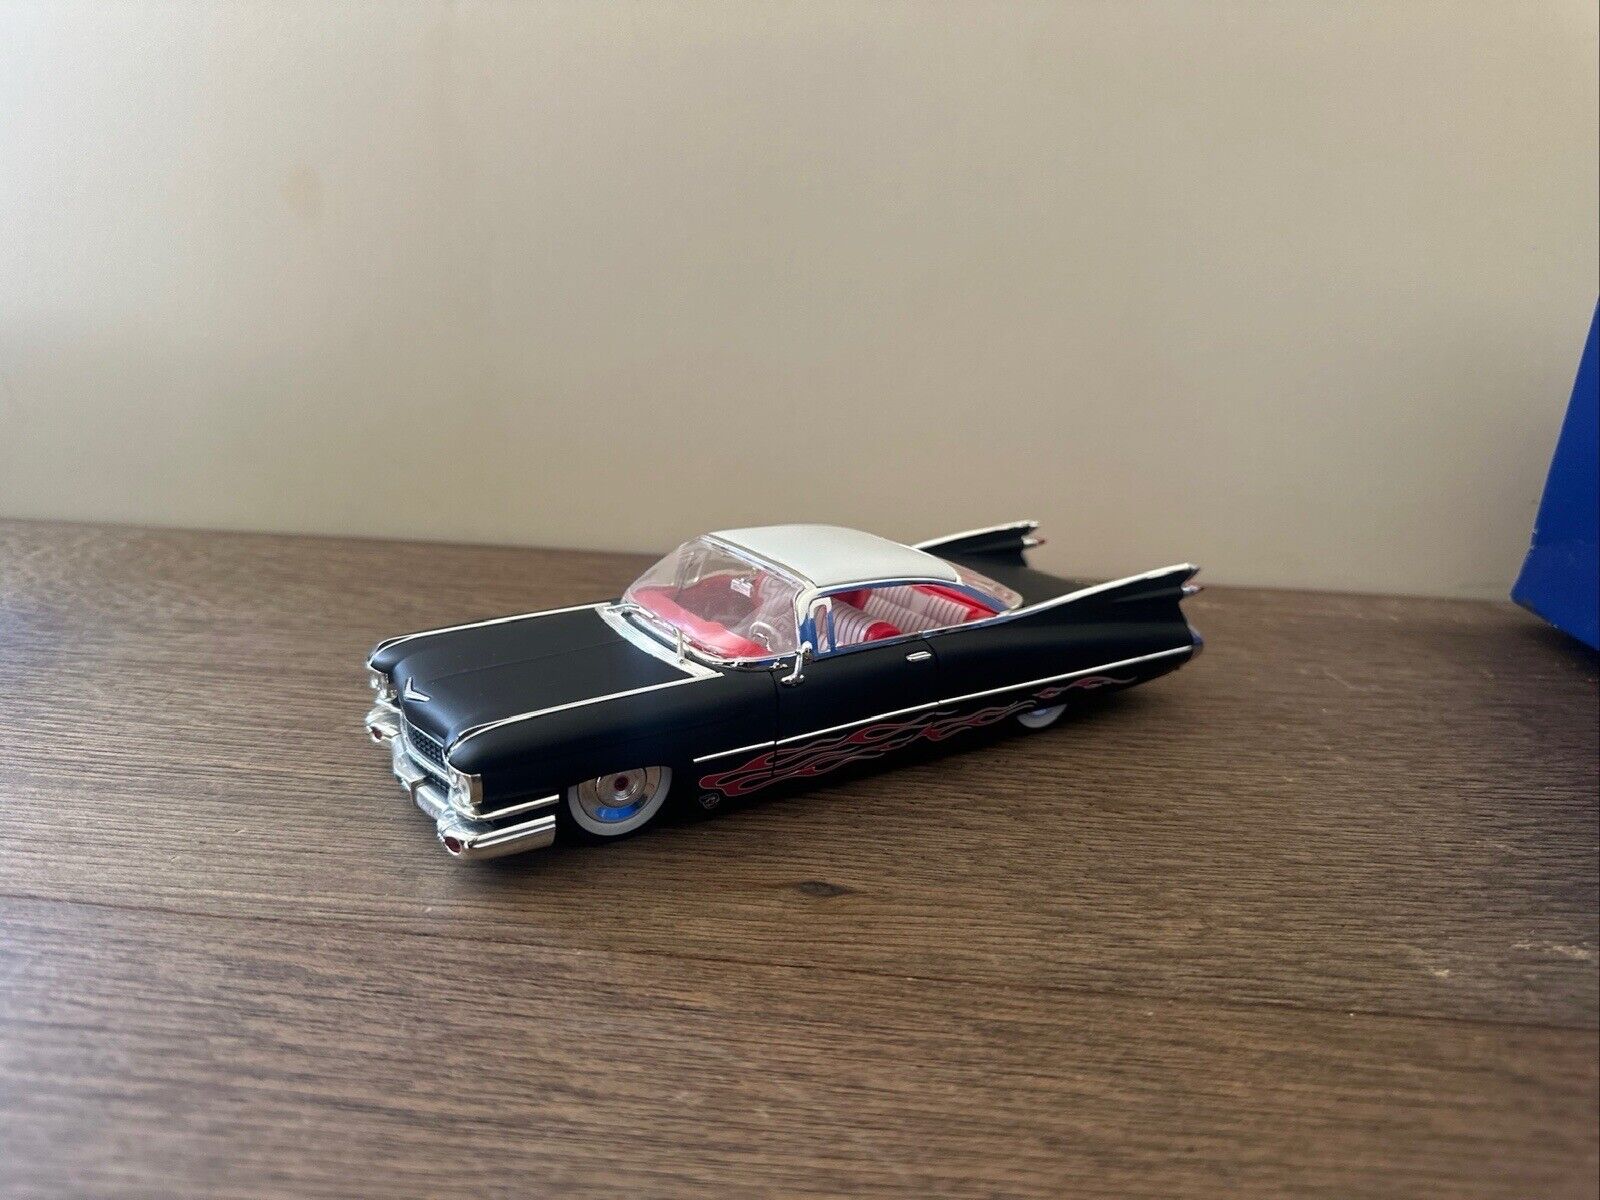 Jada Toys 50660-9 1959 Cadillac Deville Red Black 1:24 Diecast Vehicle Car Toy